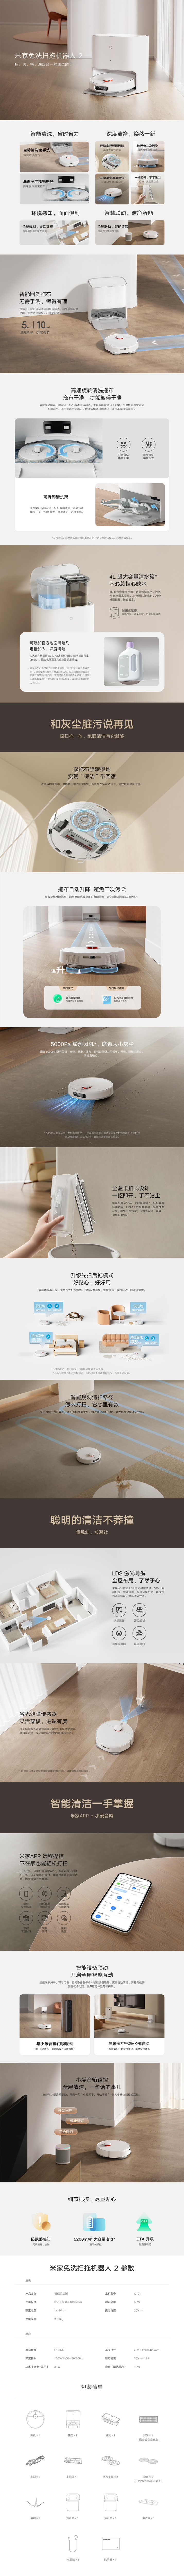 XiaoMi Mijia Disposable Sweeping and
<br>
<br>
<p><span style=